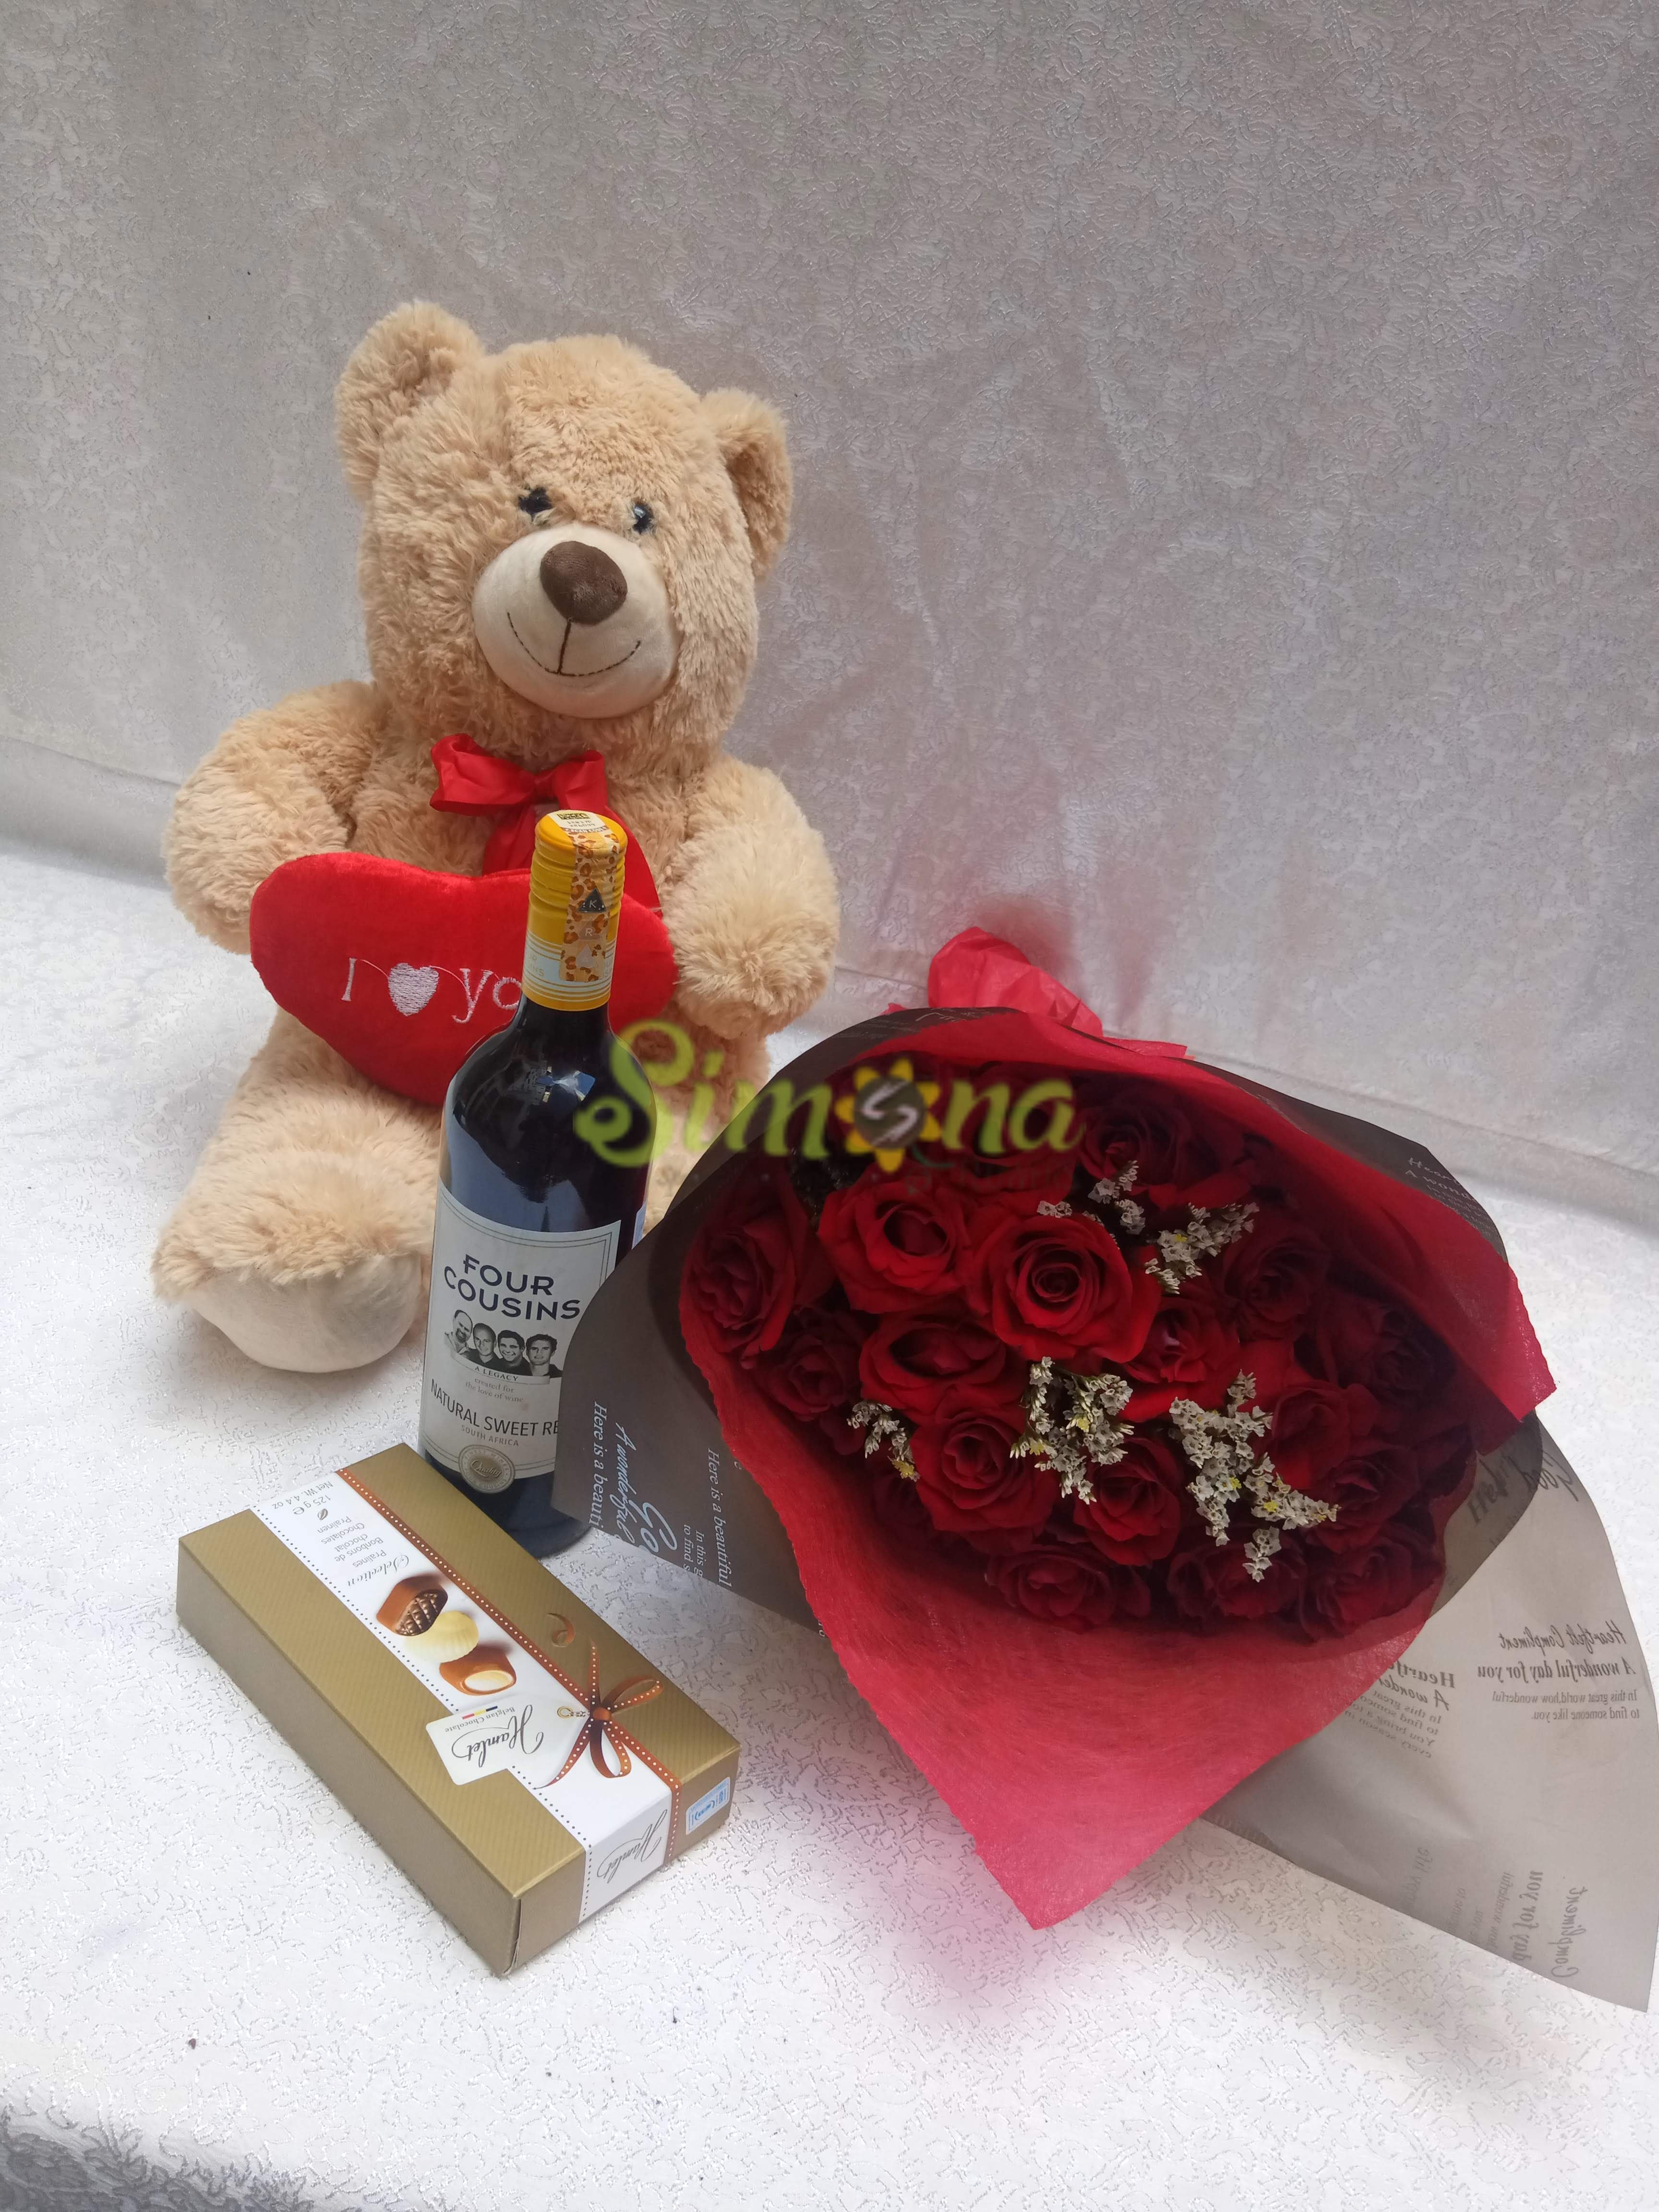 Delightful hand bouquet with teddy bear, red wine and hamlet chocolate